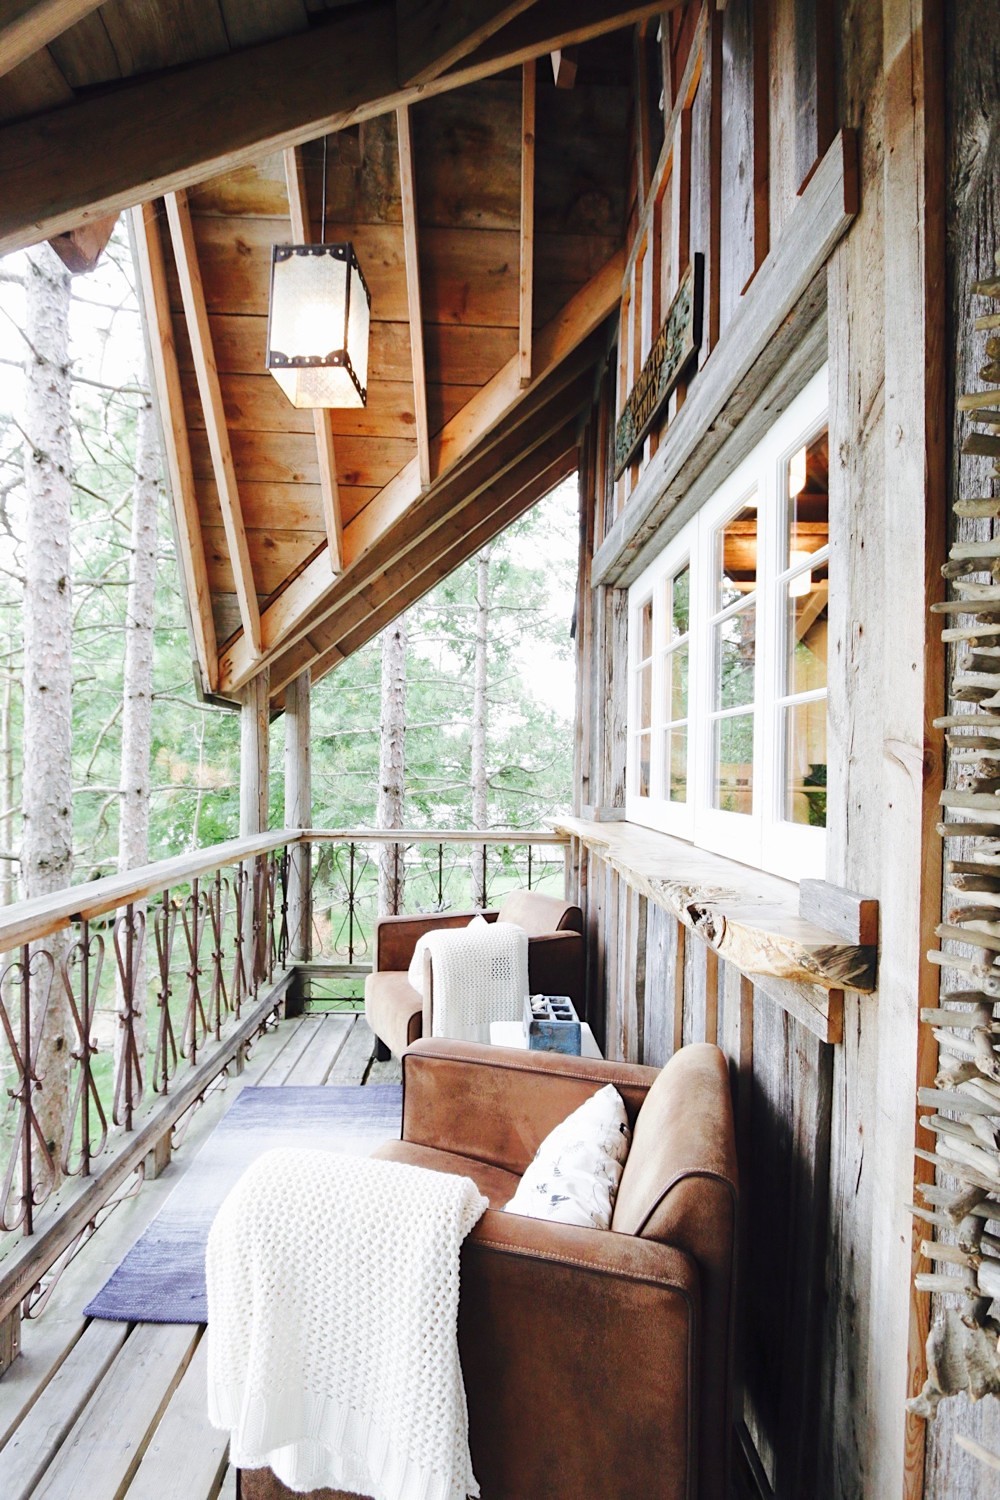 Rent the treehouse retreat via @lynneknowlton ...cabin and treehouse vacation rental on DESIGN THE LIFE YOU WANT TO LIVE